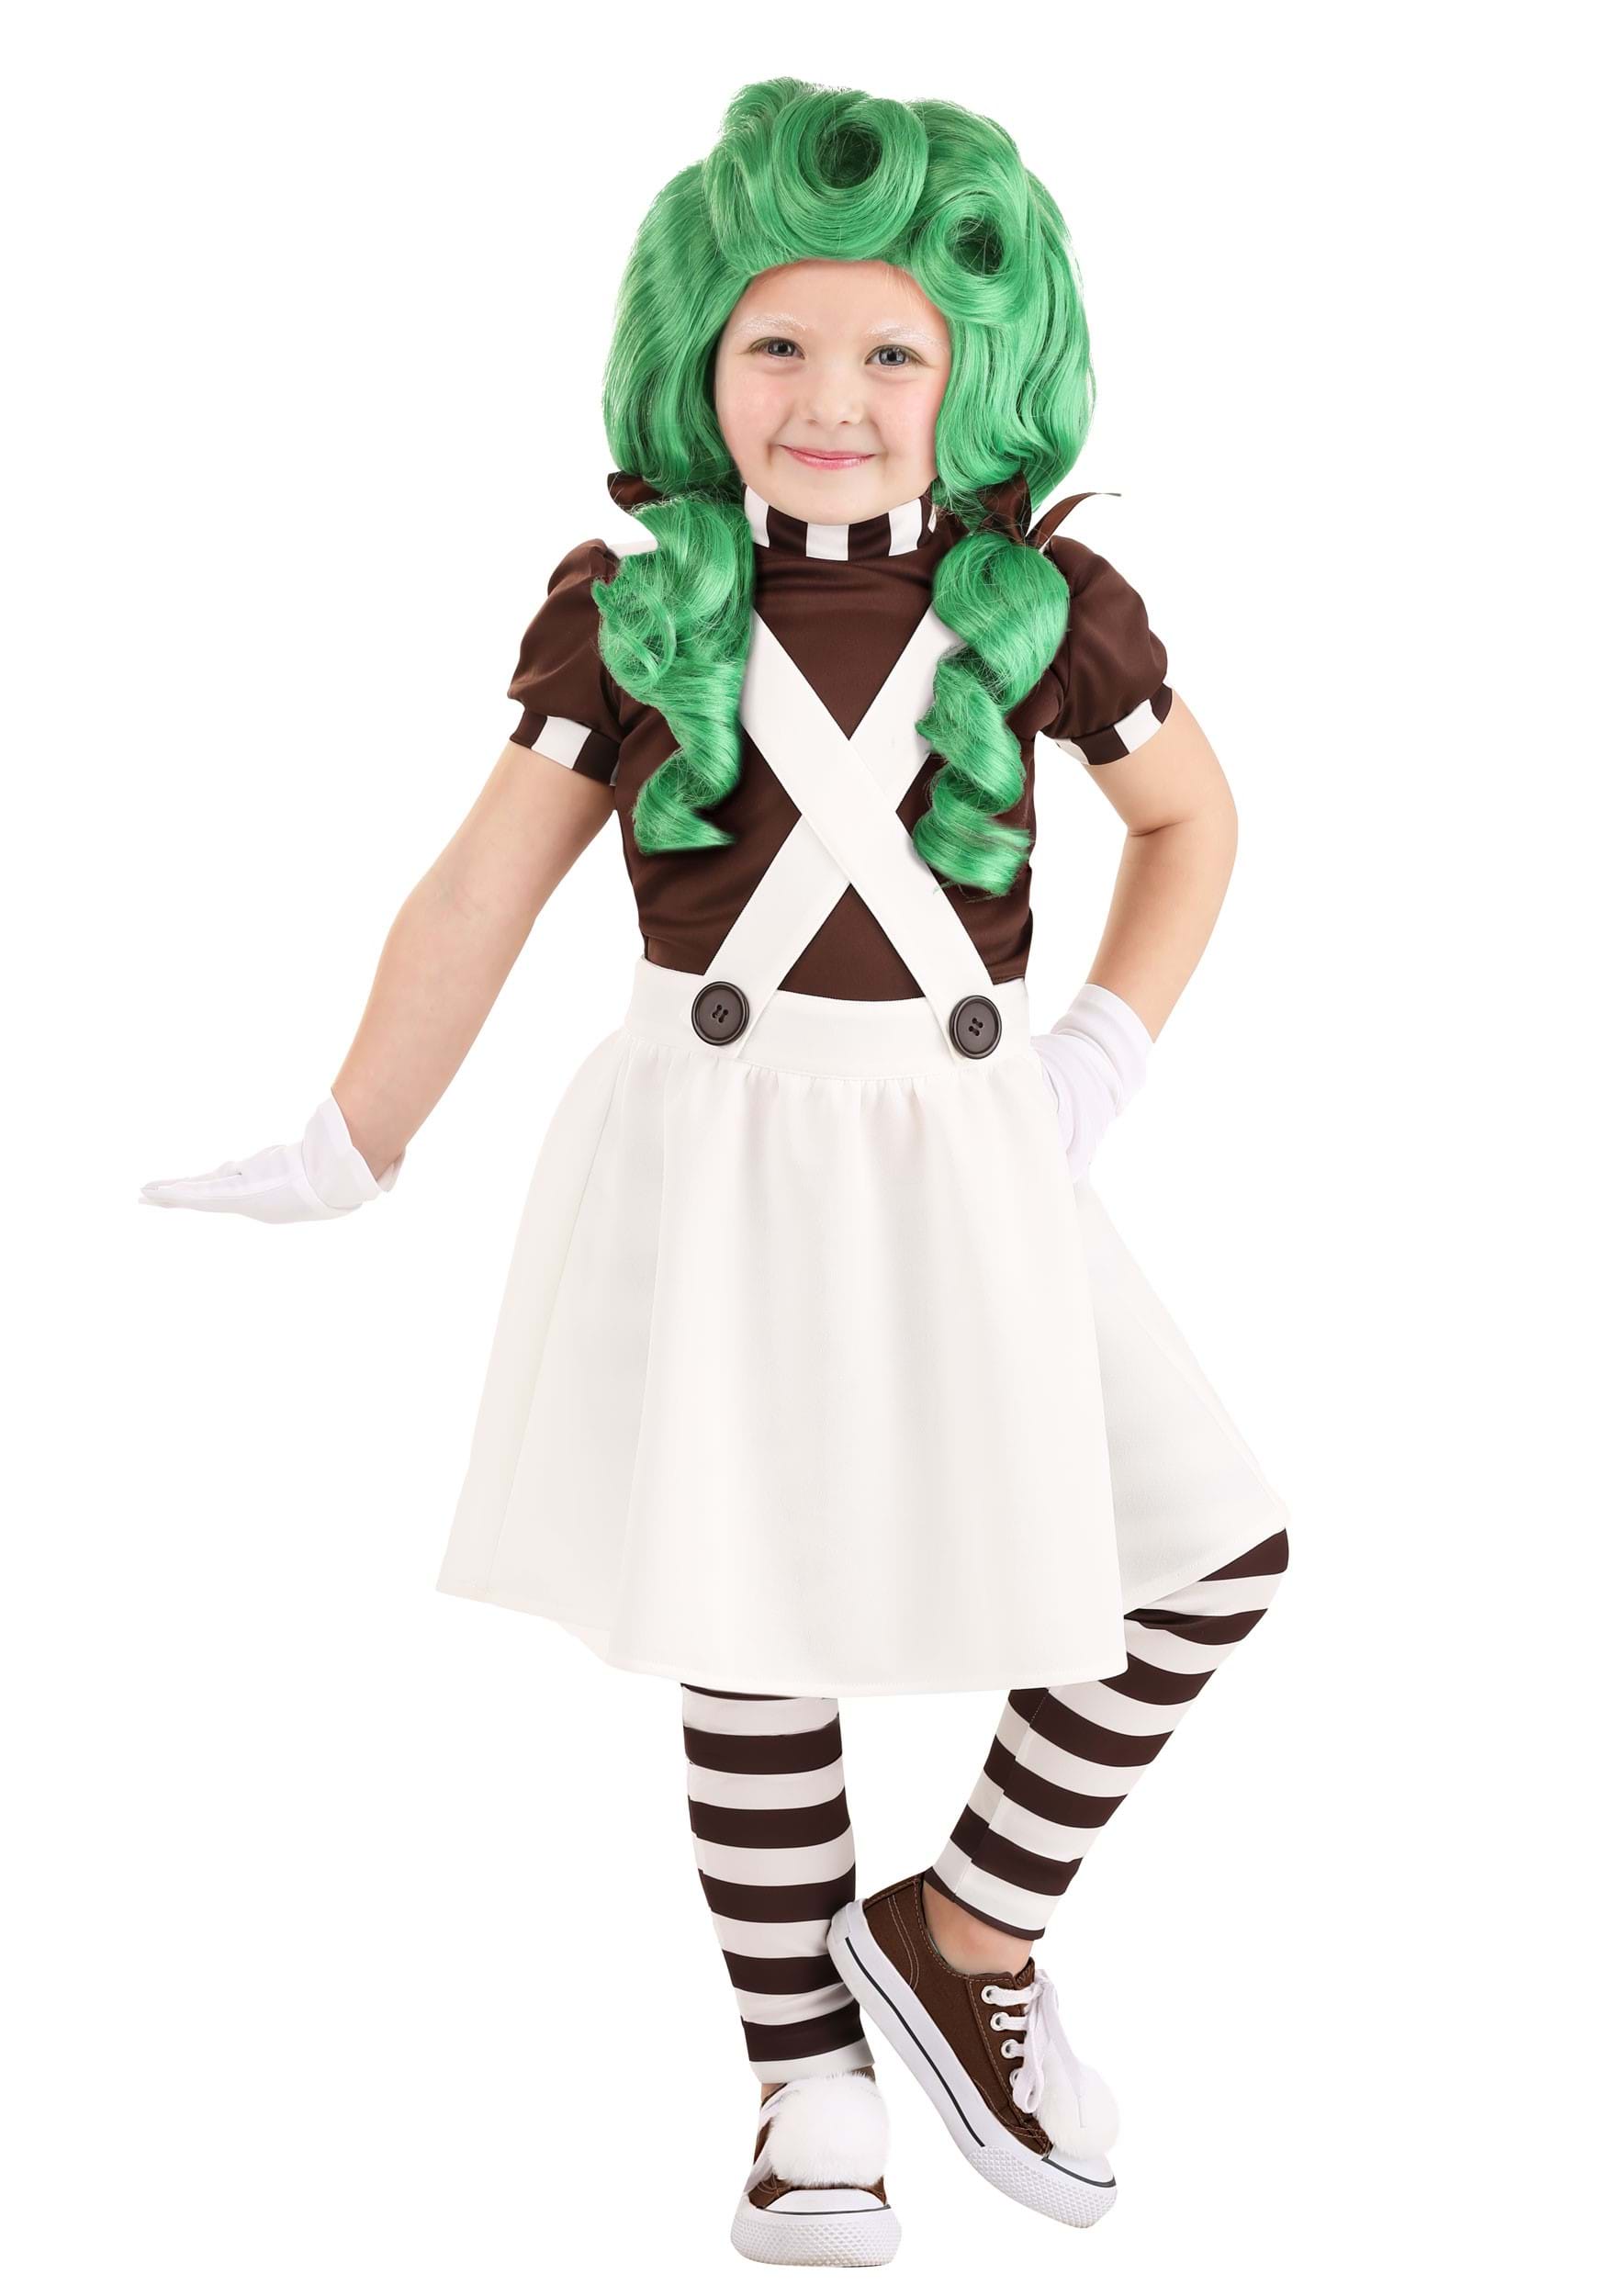 Photos - Fancy Dress FUN Costumes Girl's Toddler Chocolate Factory Worker Costume Brown/Whi